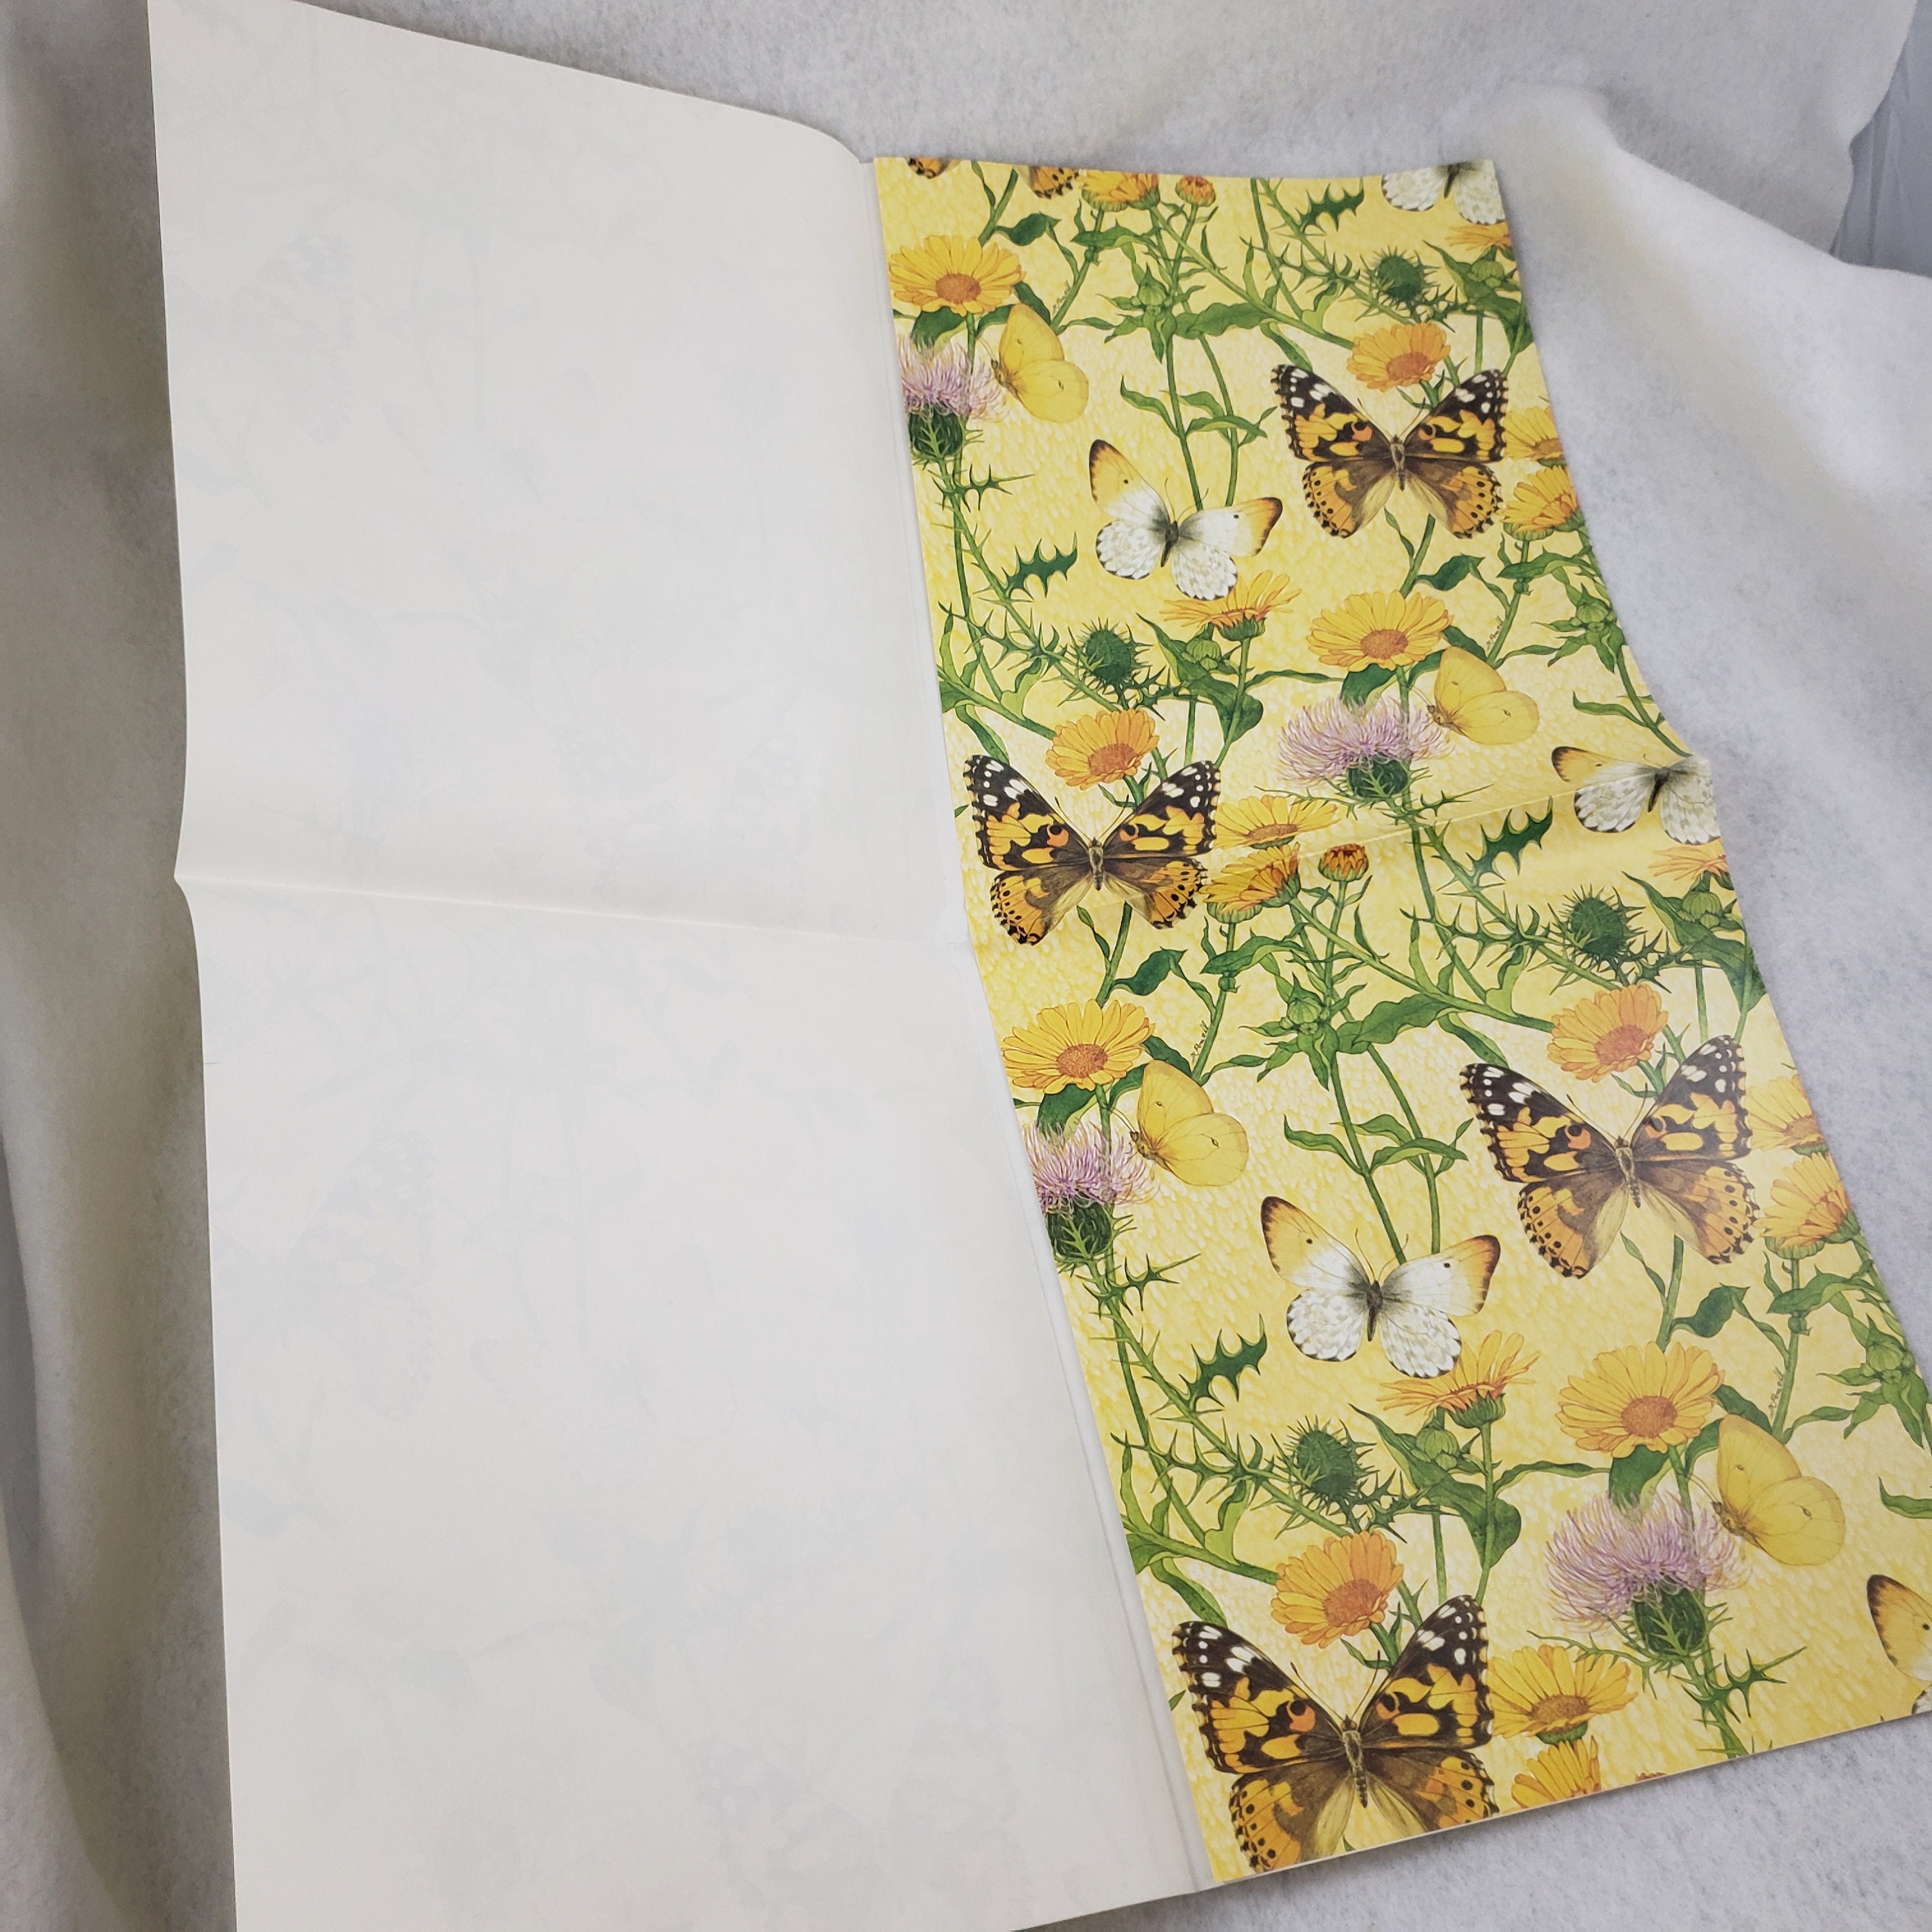 VTG Hallmark Flat Fold Gift Wrap Spring Pastel Roses Flowers Wrapping Paper  2pc